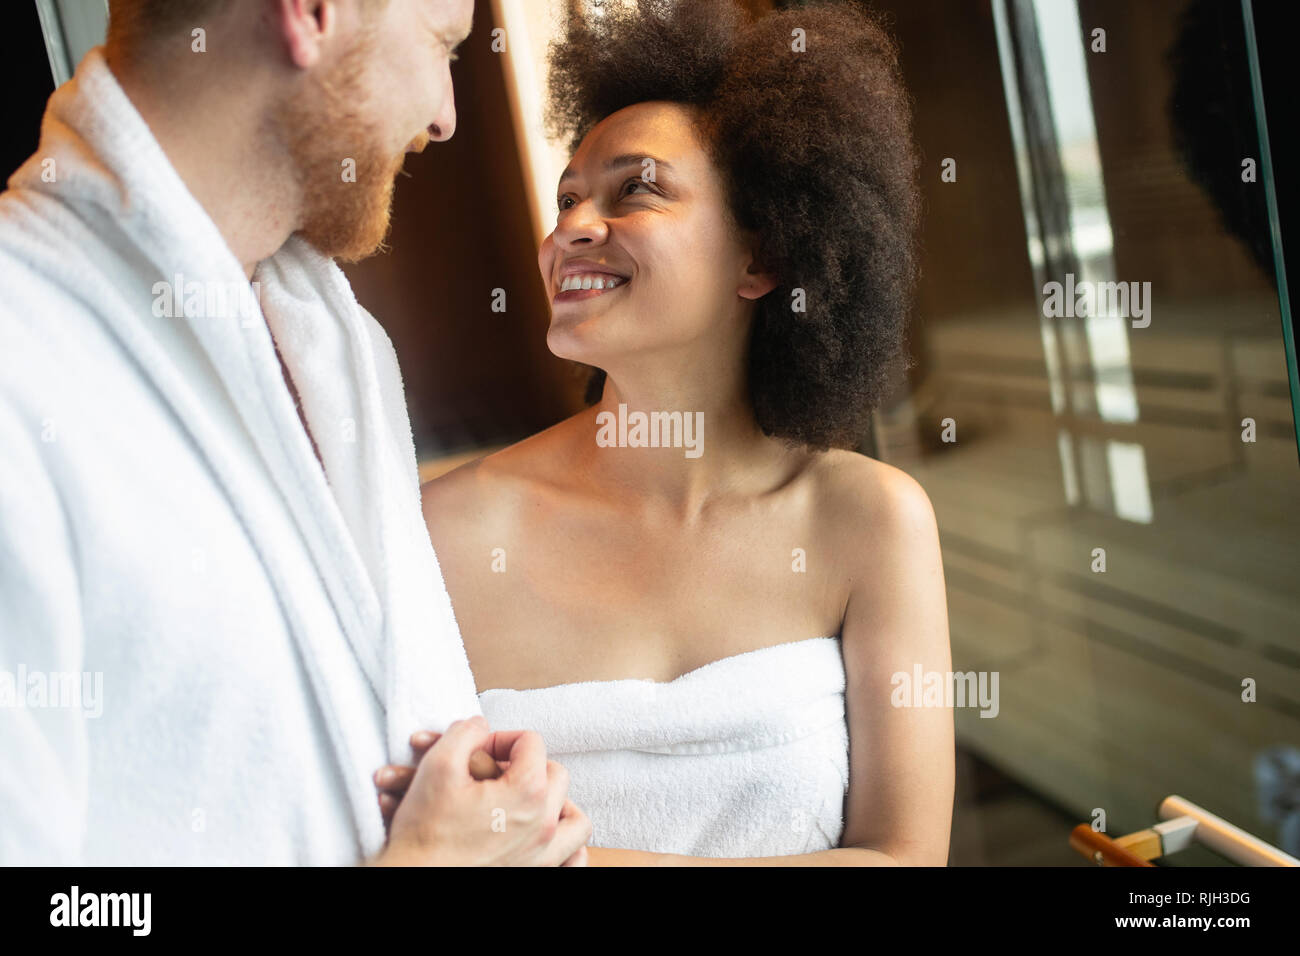 Young man and woman in luxury spa and wellness center Stock Photo